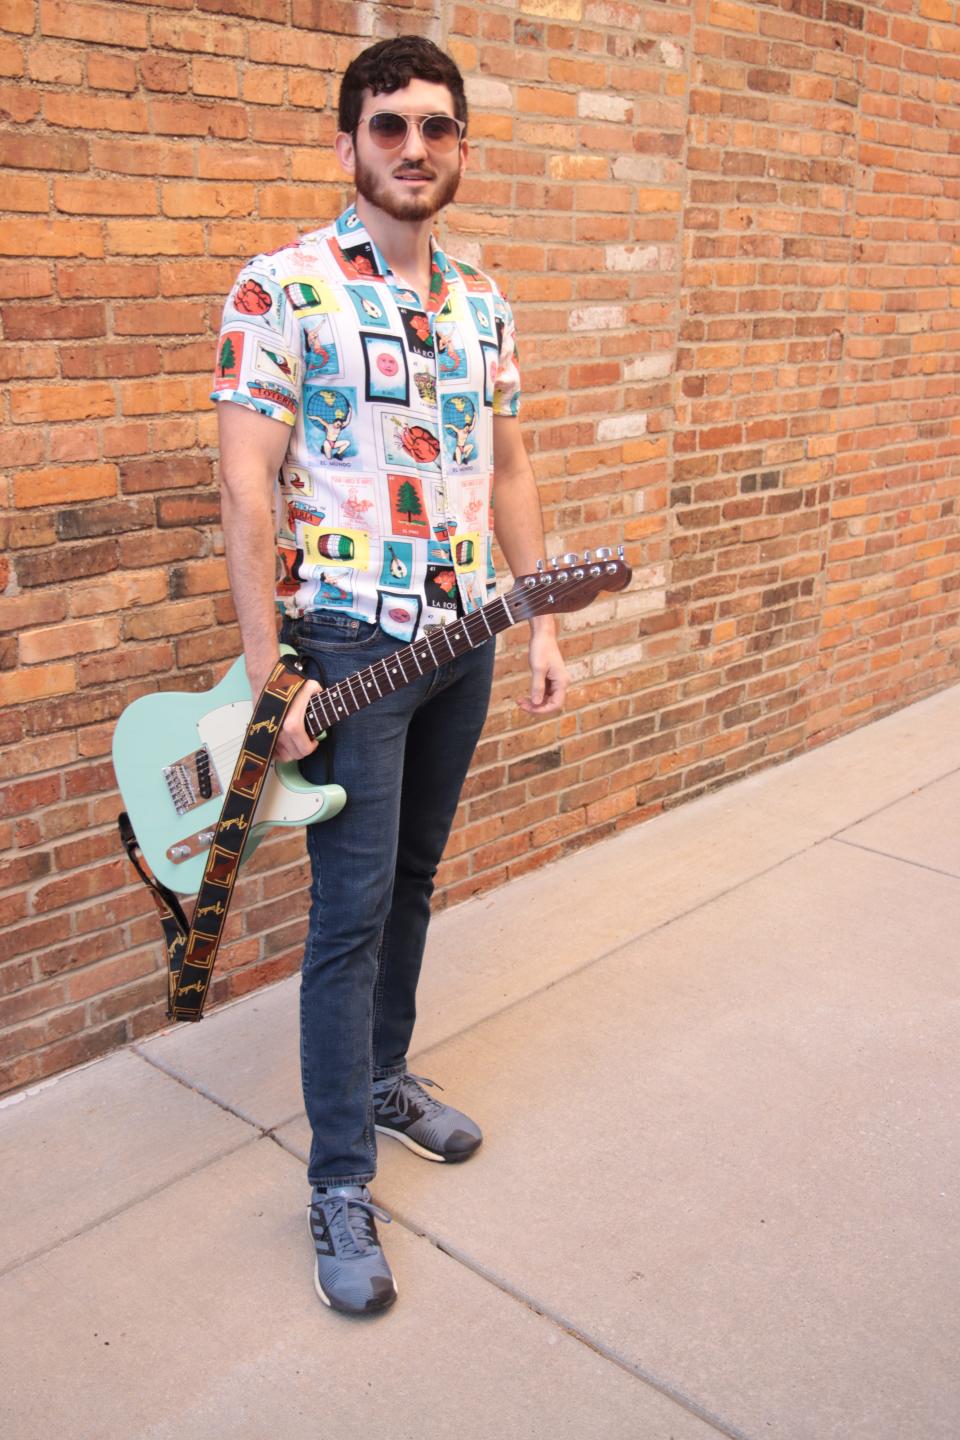 Musician Jonathan Crayne, pictured May 7 in Adrian, recently released his first CD, "Oknow." Crayne is a graduate of Adrian High School and Adrian College.